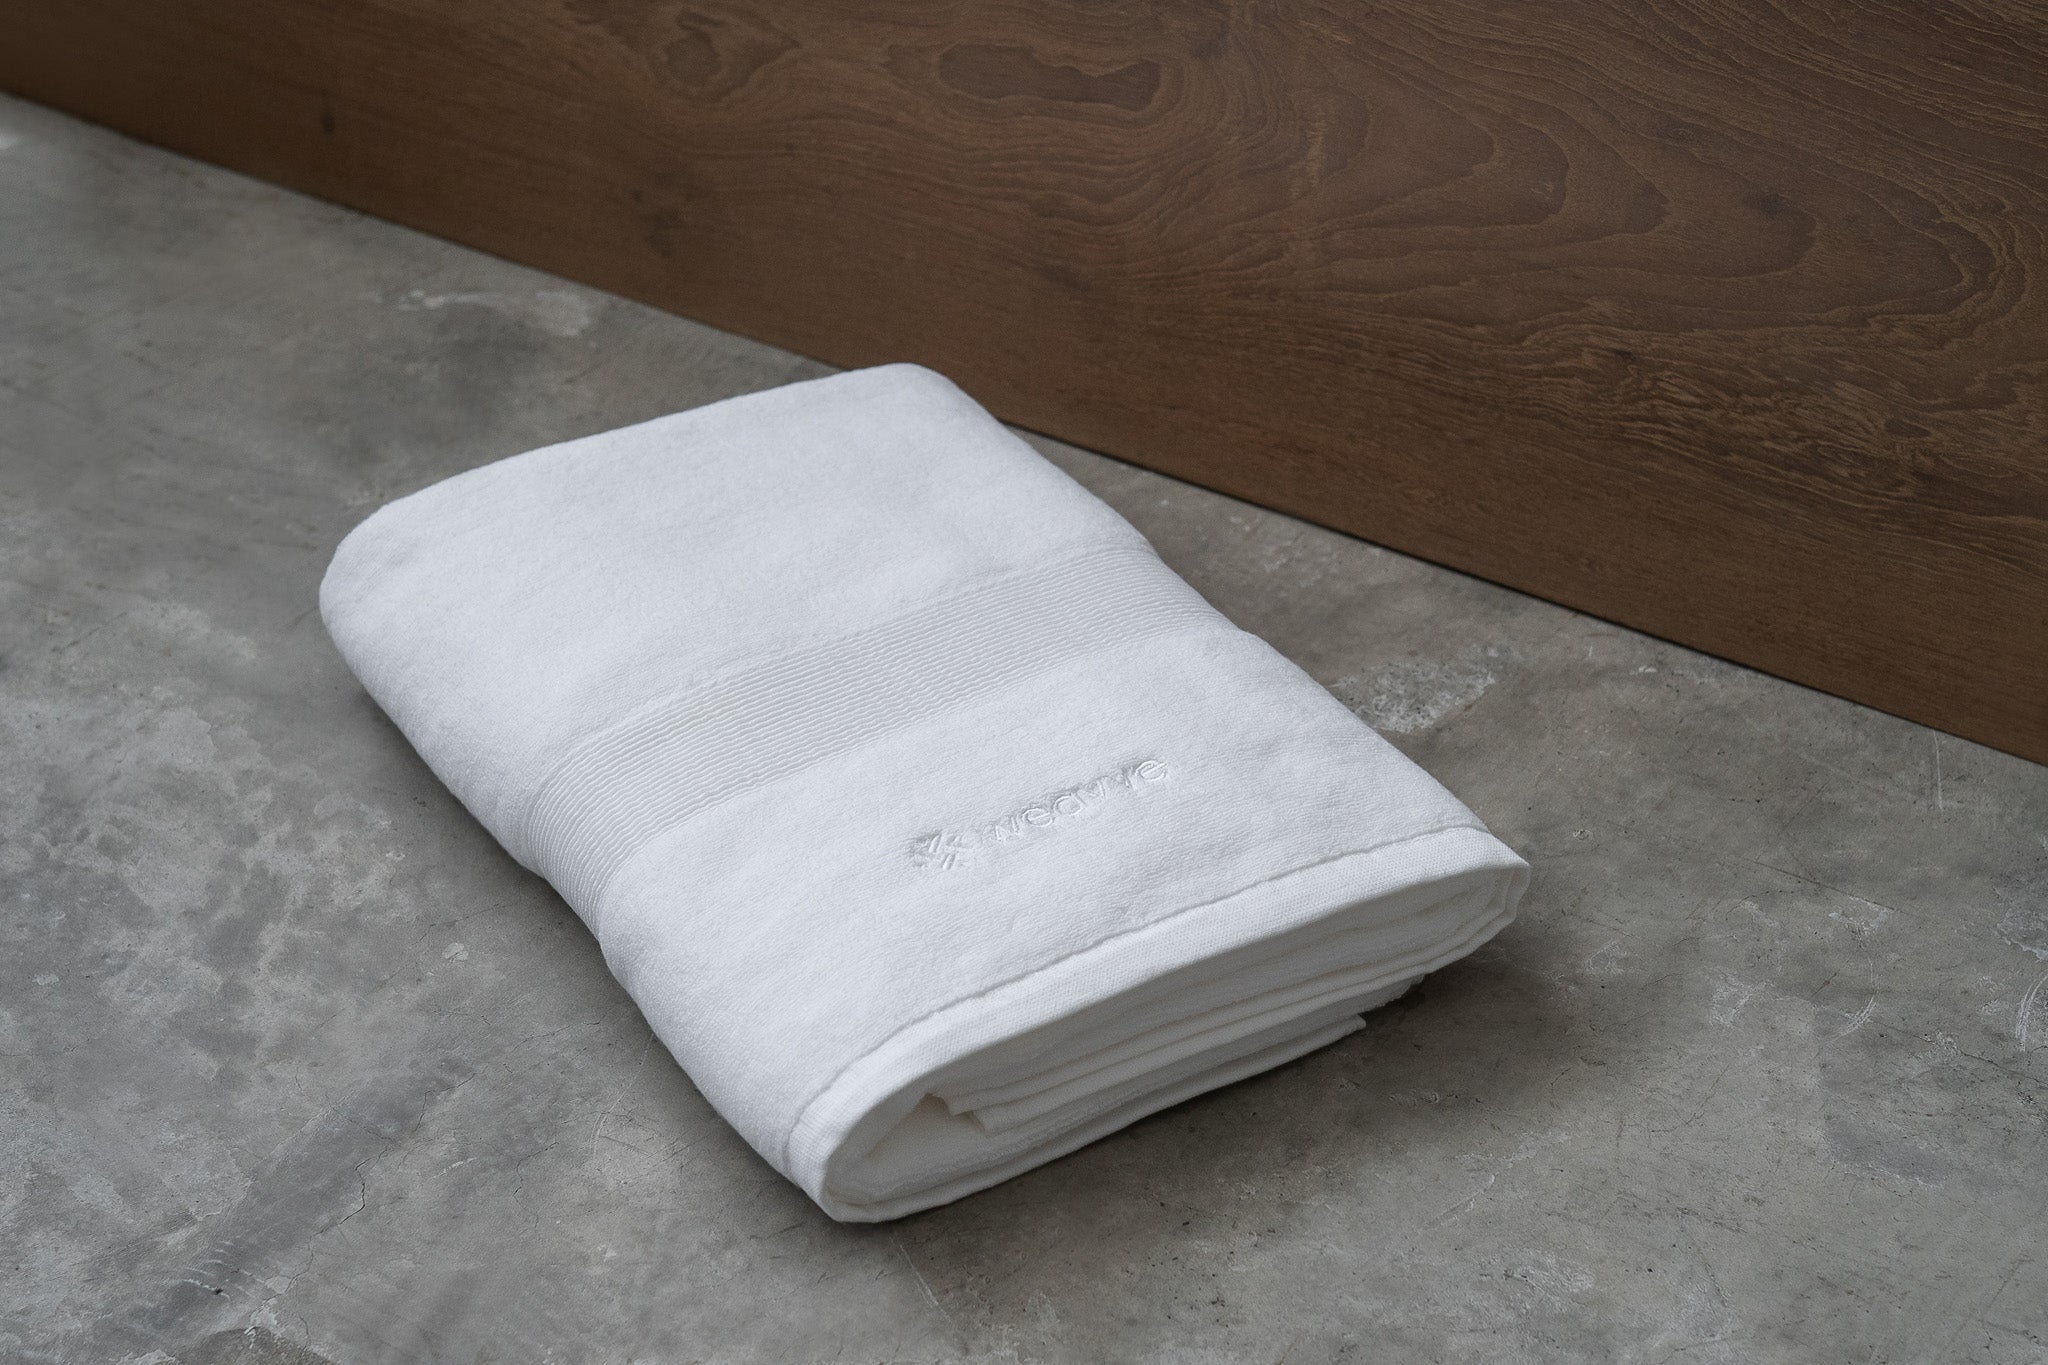 Weavve Home's white silver infused cotton towel